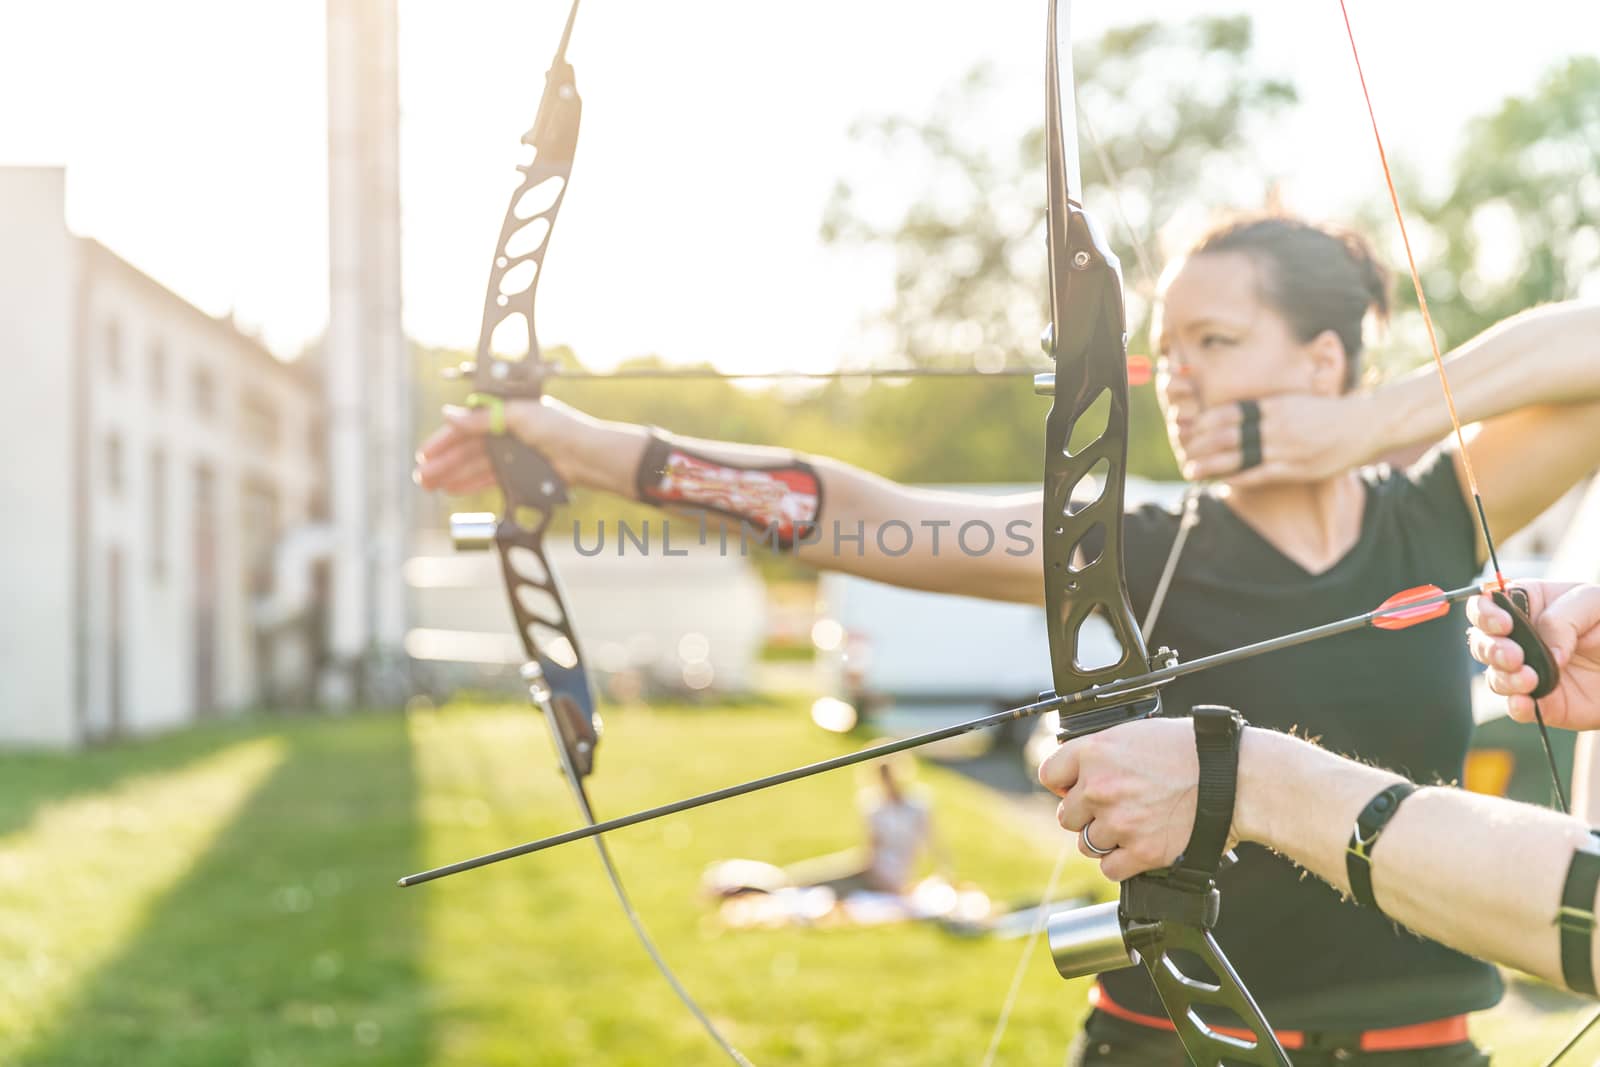 archery competition, woman preparing a bow and arrow to hit targets.